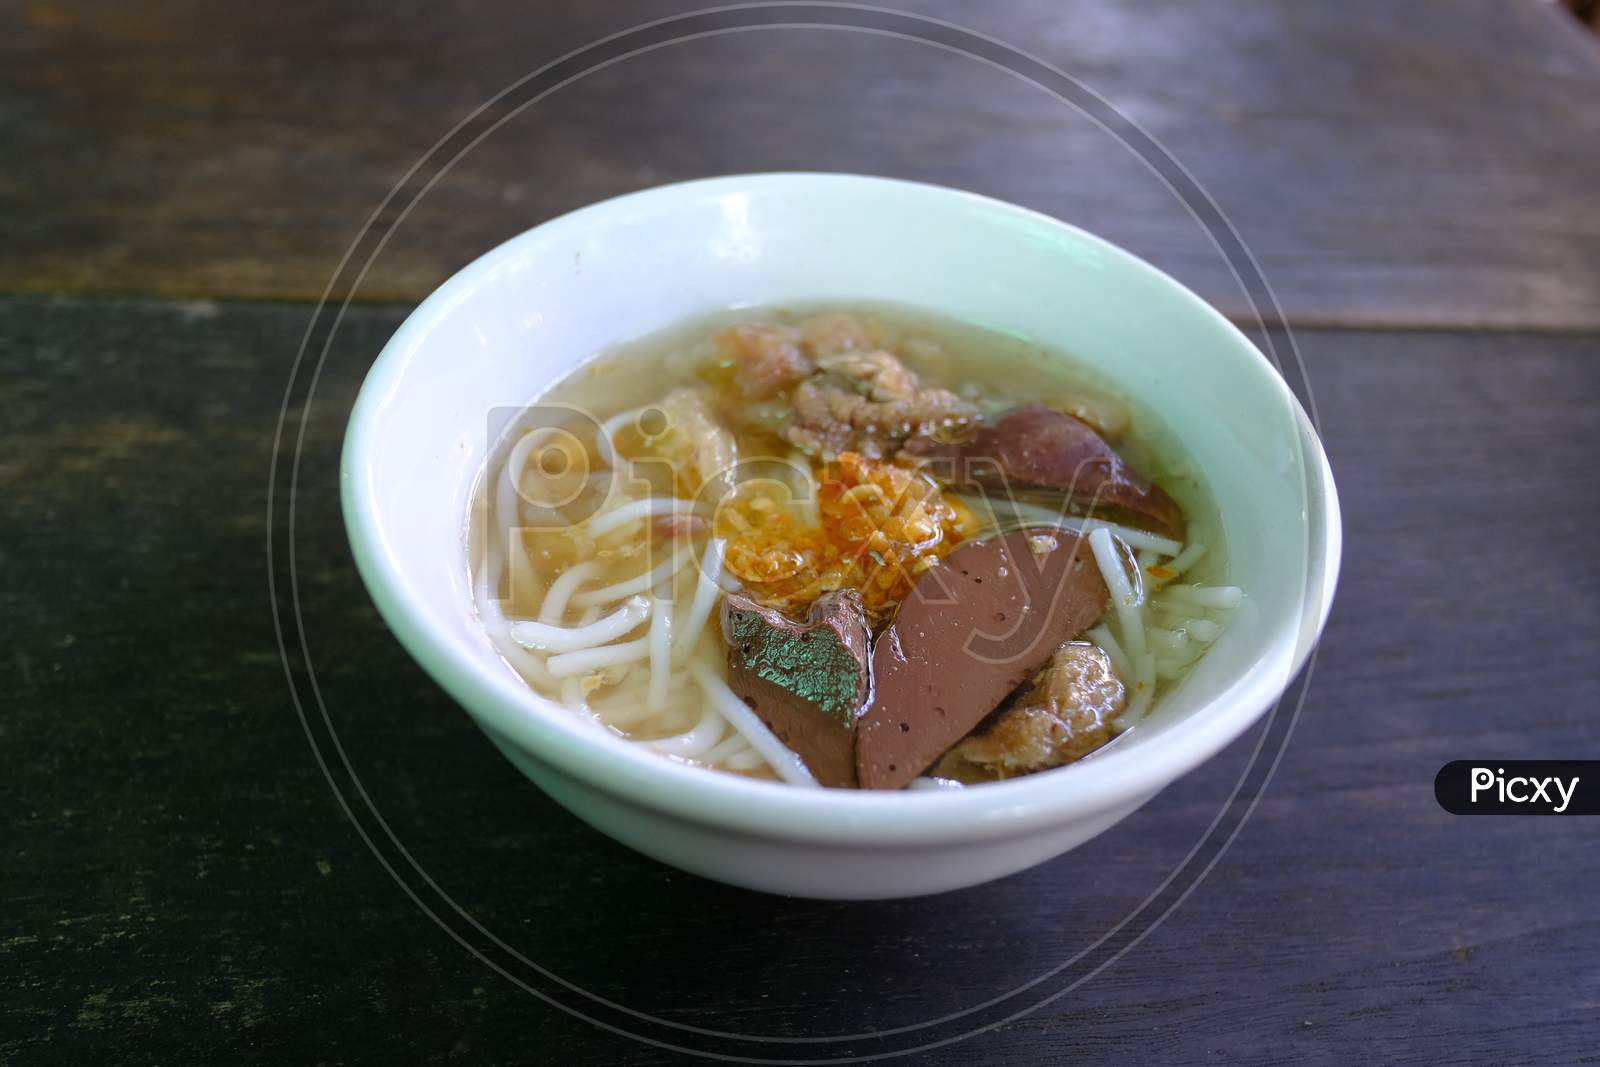 Mini Bowl Of Steam Thai Rice Vermicelli With Pig Blood In Clear Soup Topped With Fried Garlic On The Dark Wooden Table